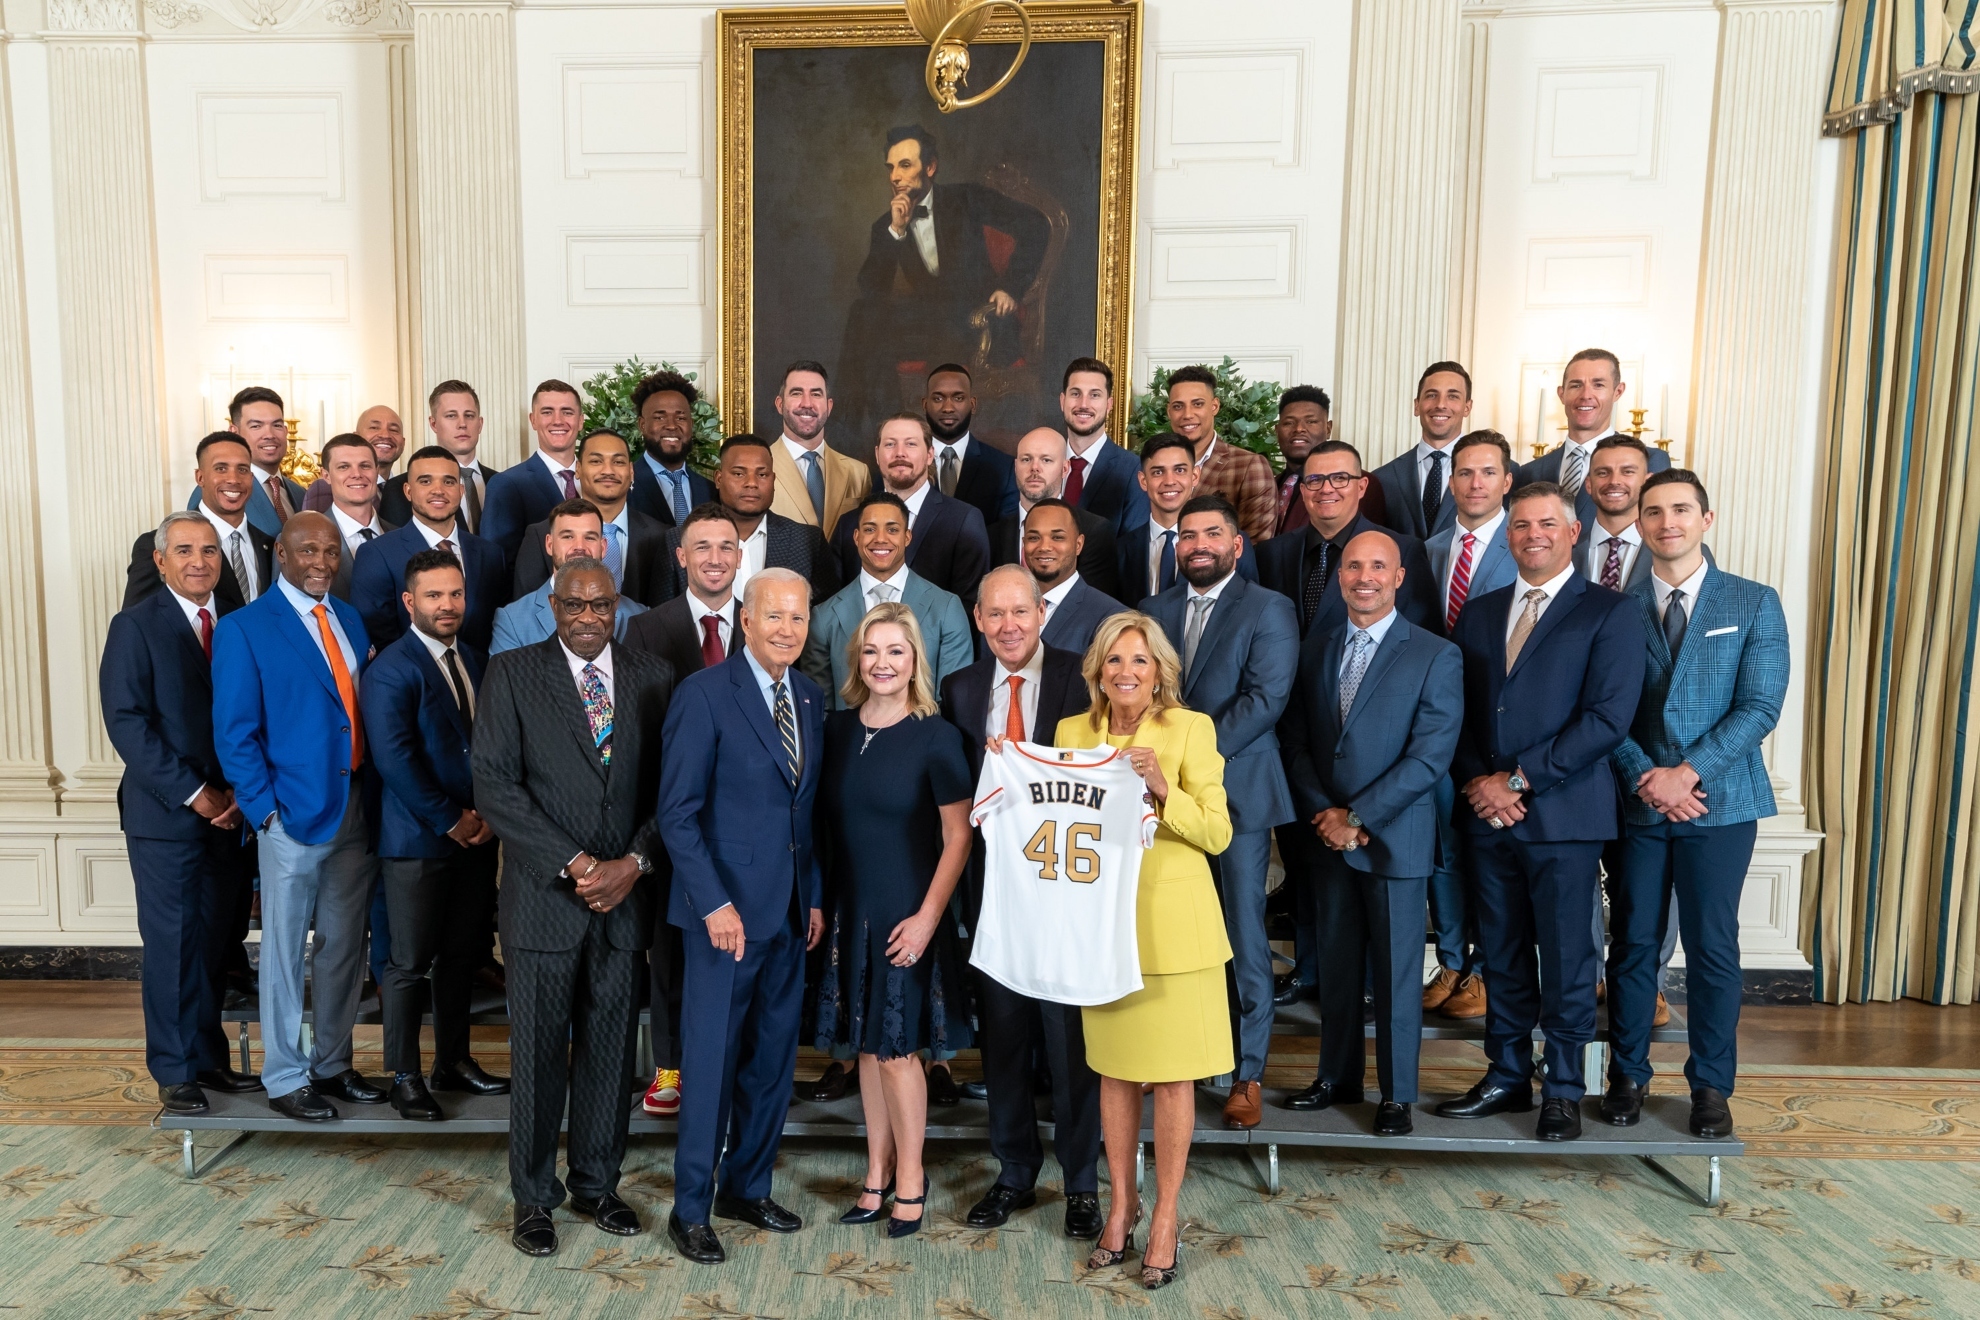 Astros visit the White House while President Biden recognizes their efforts supporting the Uvalde community